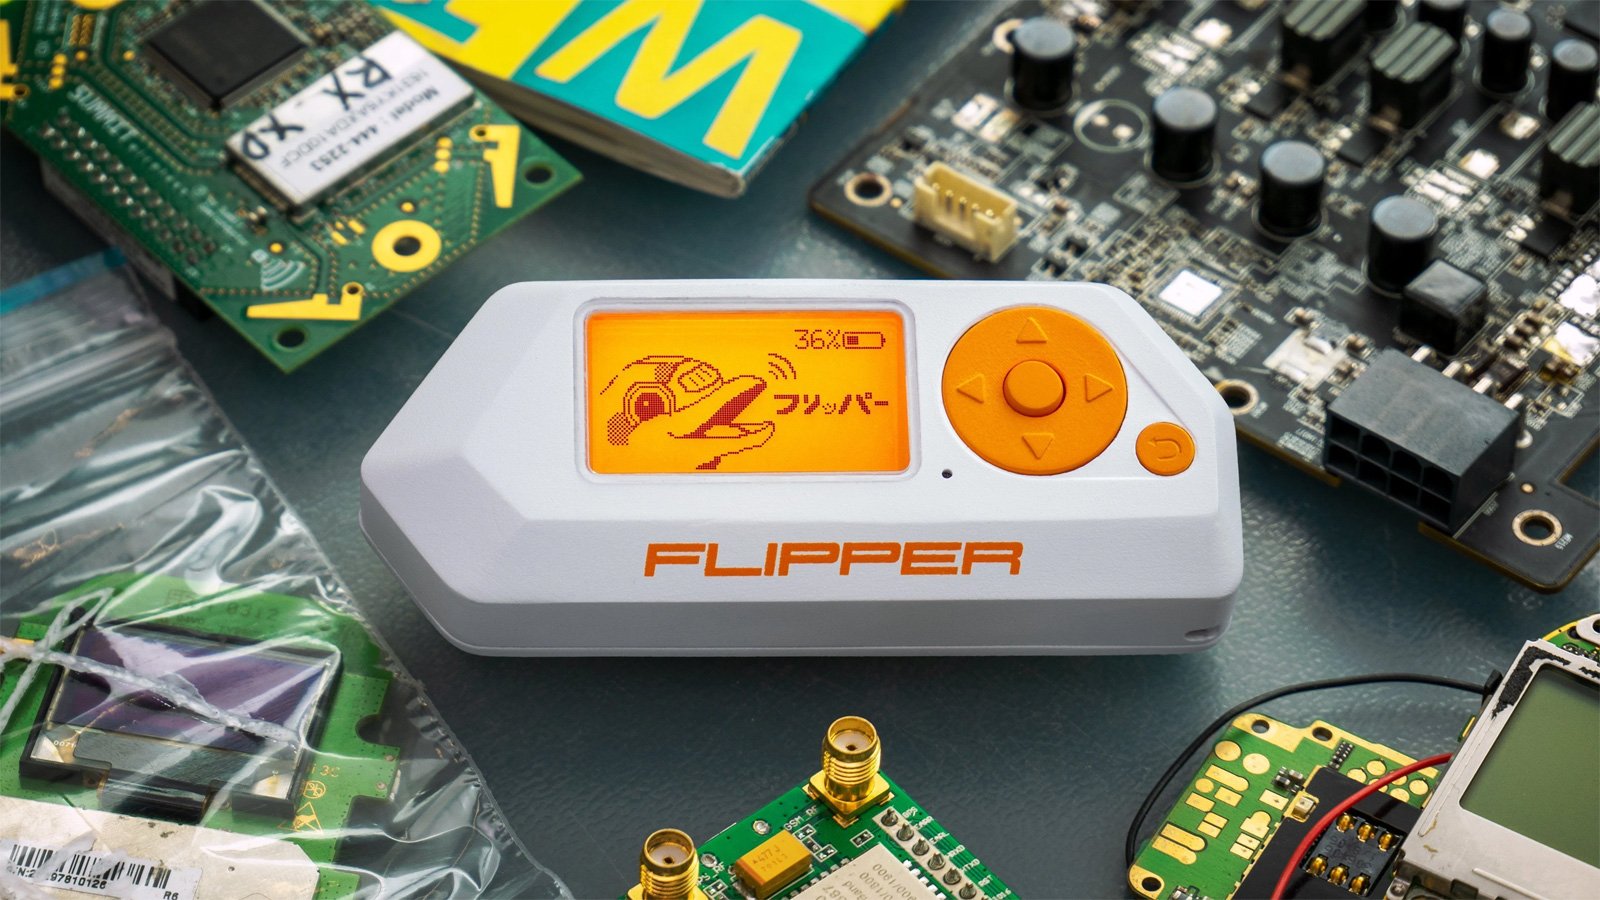 Flipper Zero now has an app store to install third-party apps – Source: www.bleepingcomputer.com